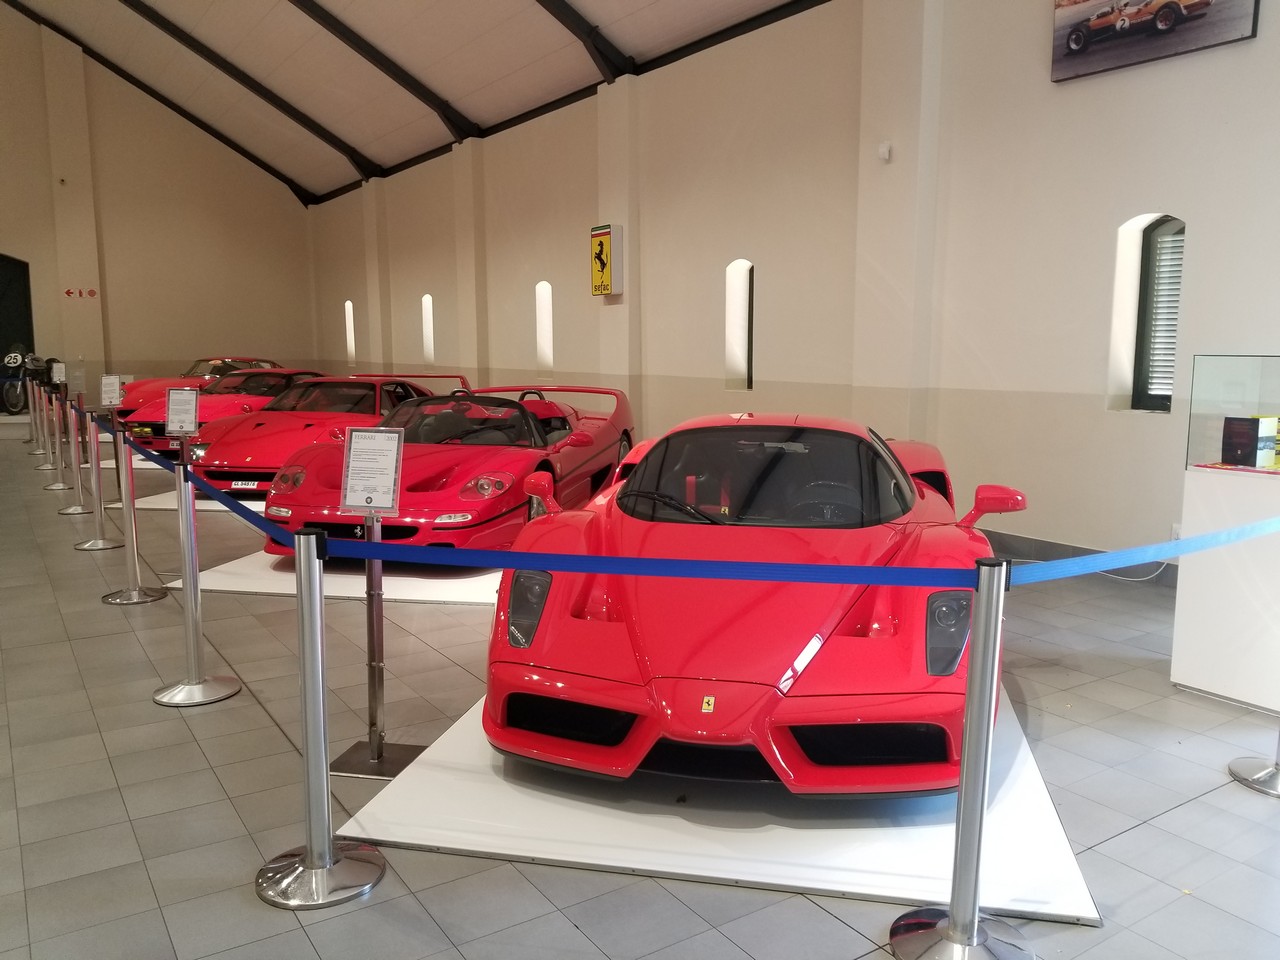 a red sports cars on display in a building